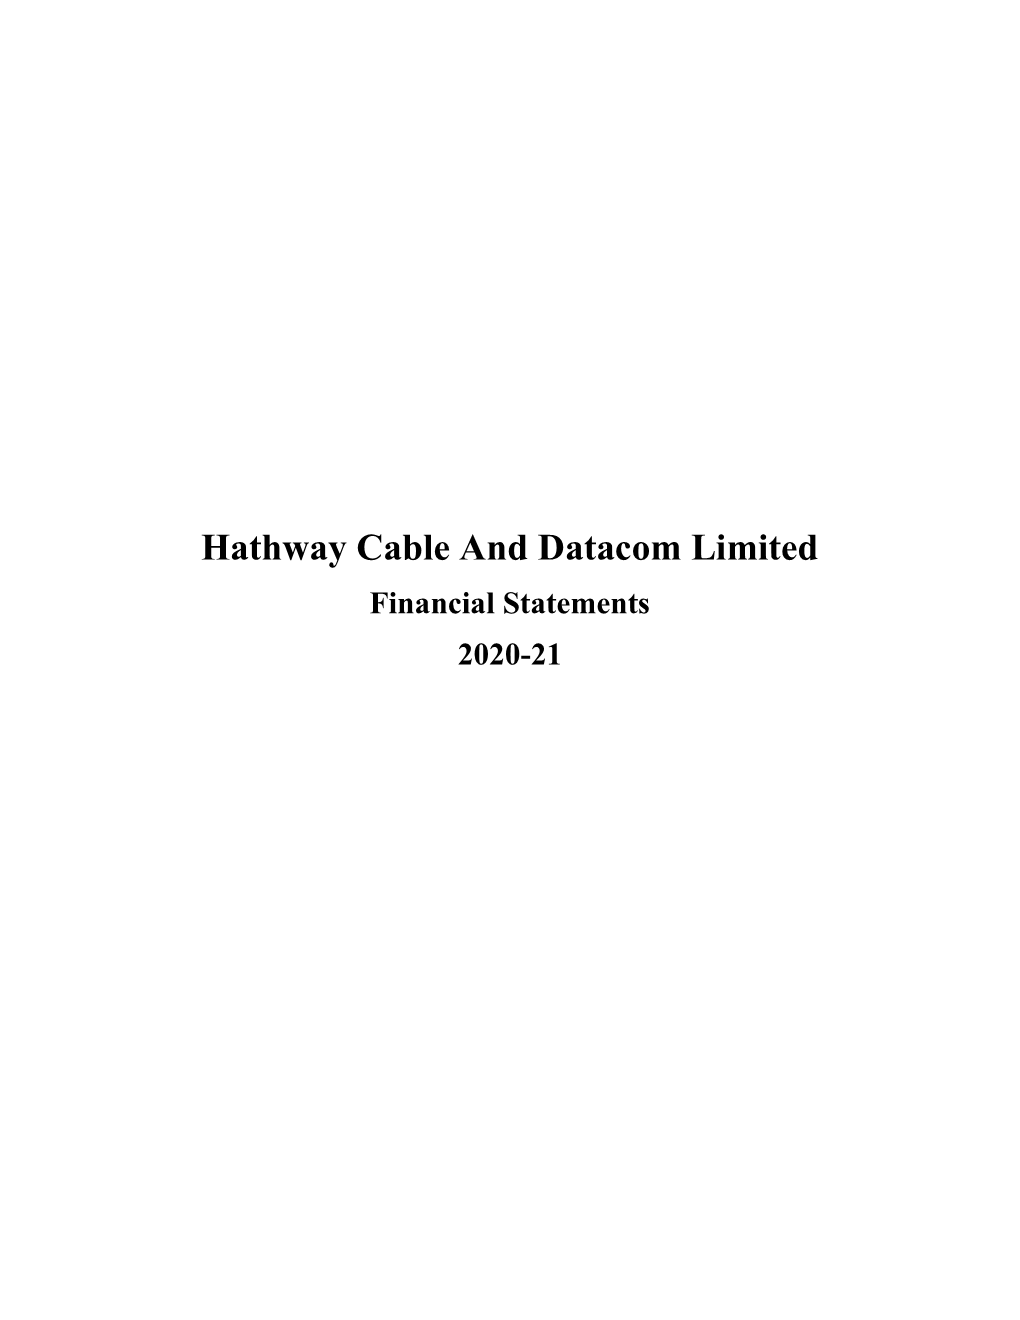 Hathway Cable and Datacom Limited Financial Statements 2020-21 2 | HATHWAY CABLE and DATACOM LIMITED